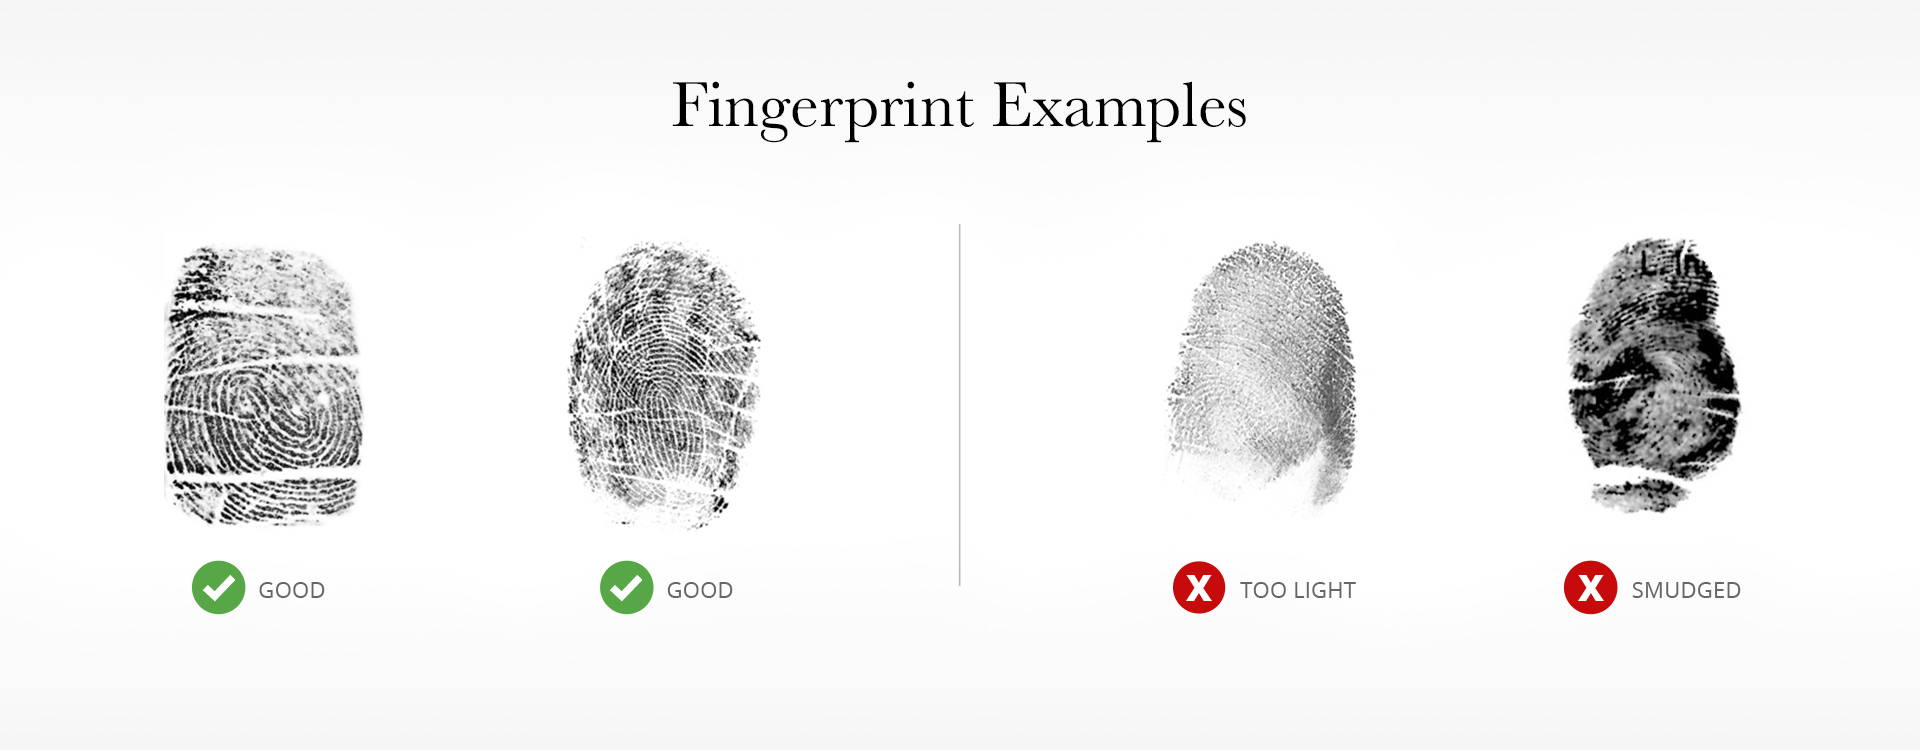 examples of different acceptable fingerprints